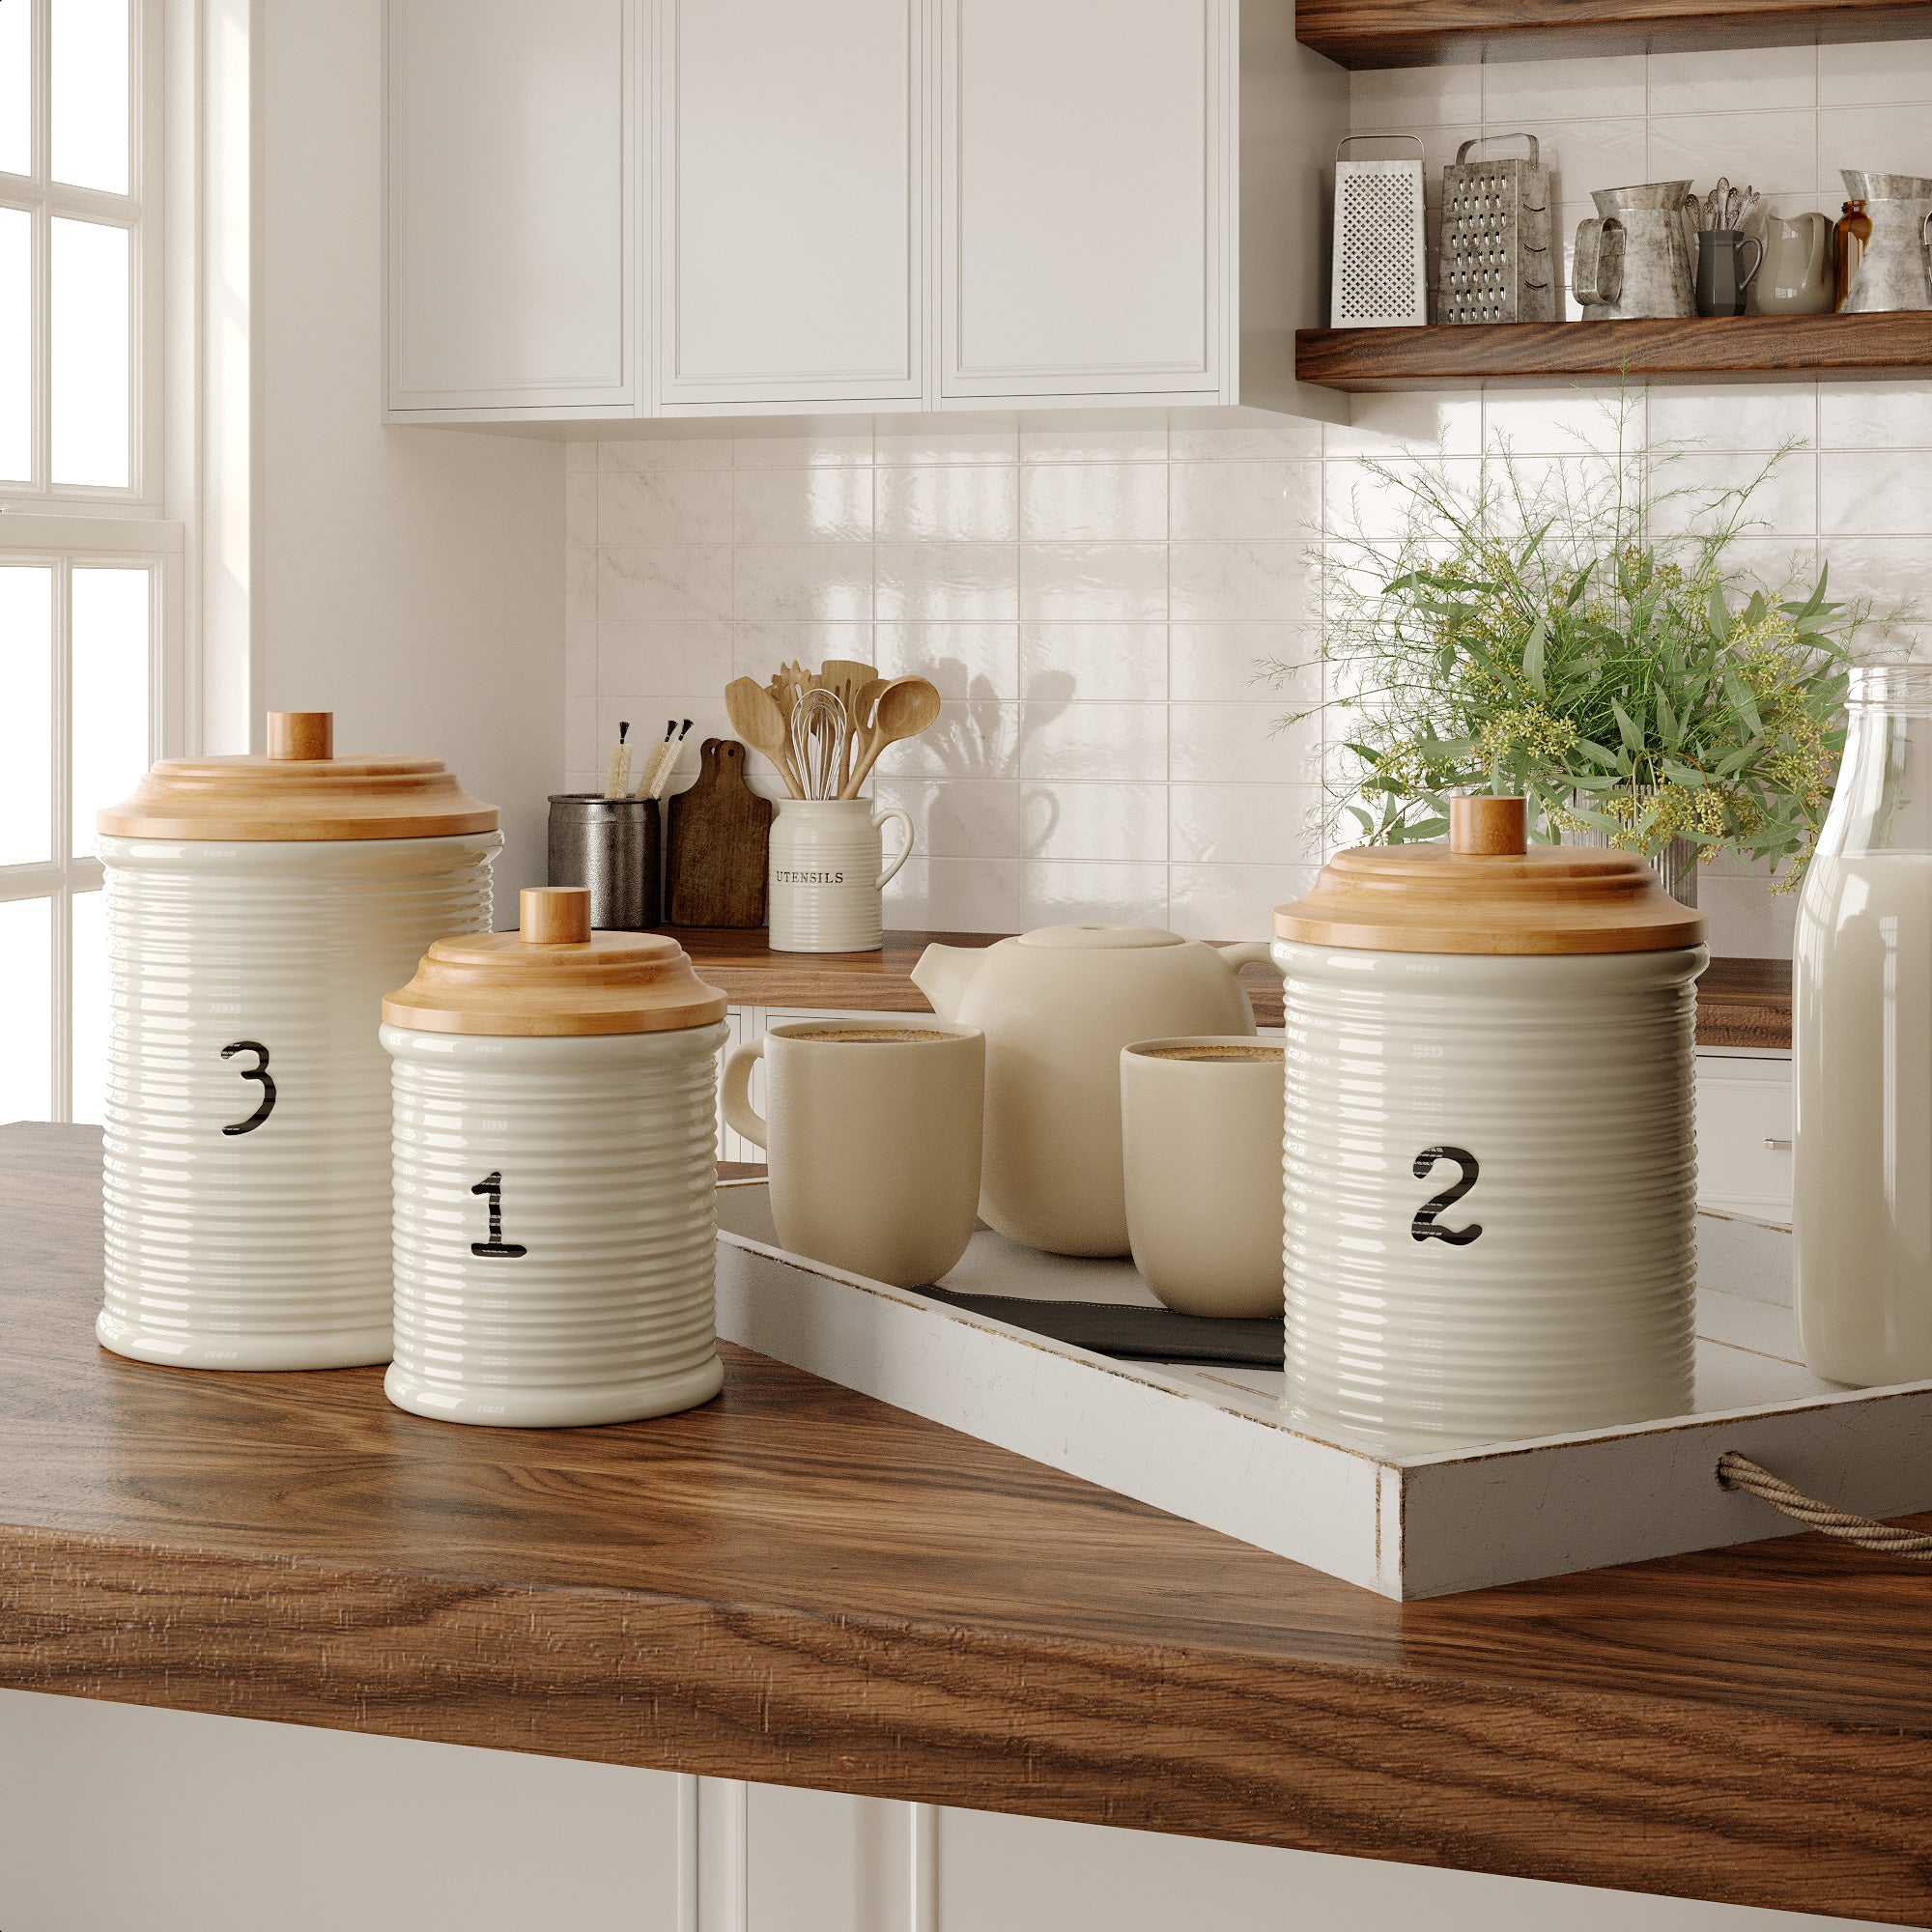 Ceramic Canister Set - Kitchen Canisters - Kitchen Containers - Set of 3